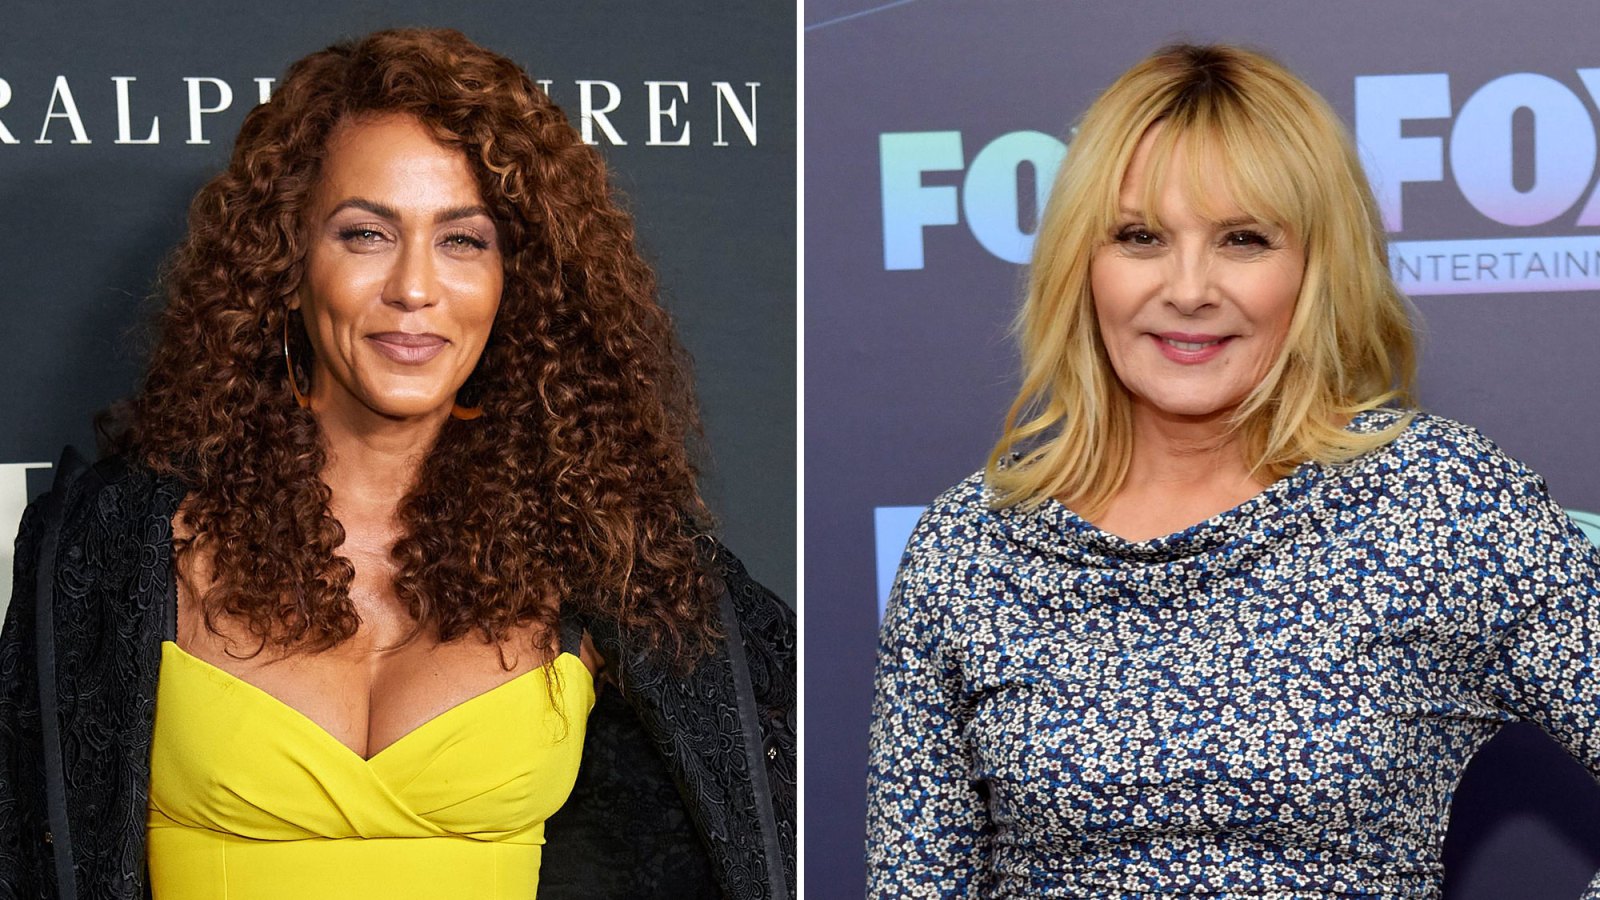 And Just Like That’s Nicole Ari Parker Says She Didn’t Replace Kim Cattrall